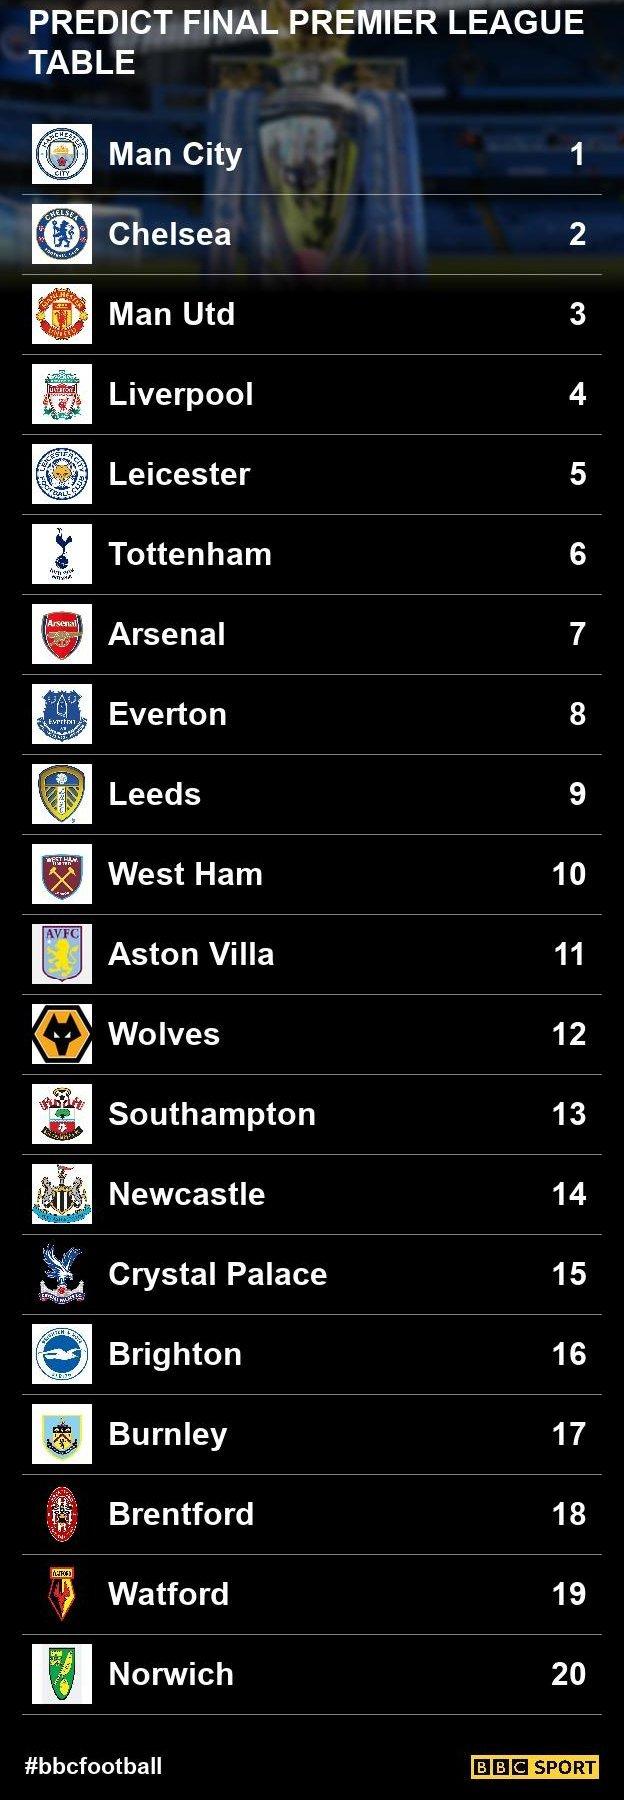 Premier League After 10 Games How Did You See The Final Table Looking